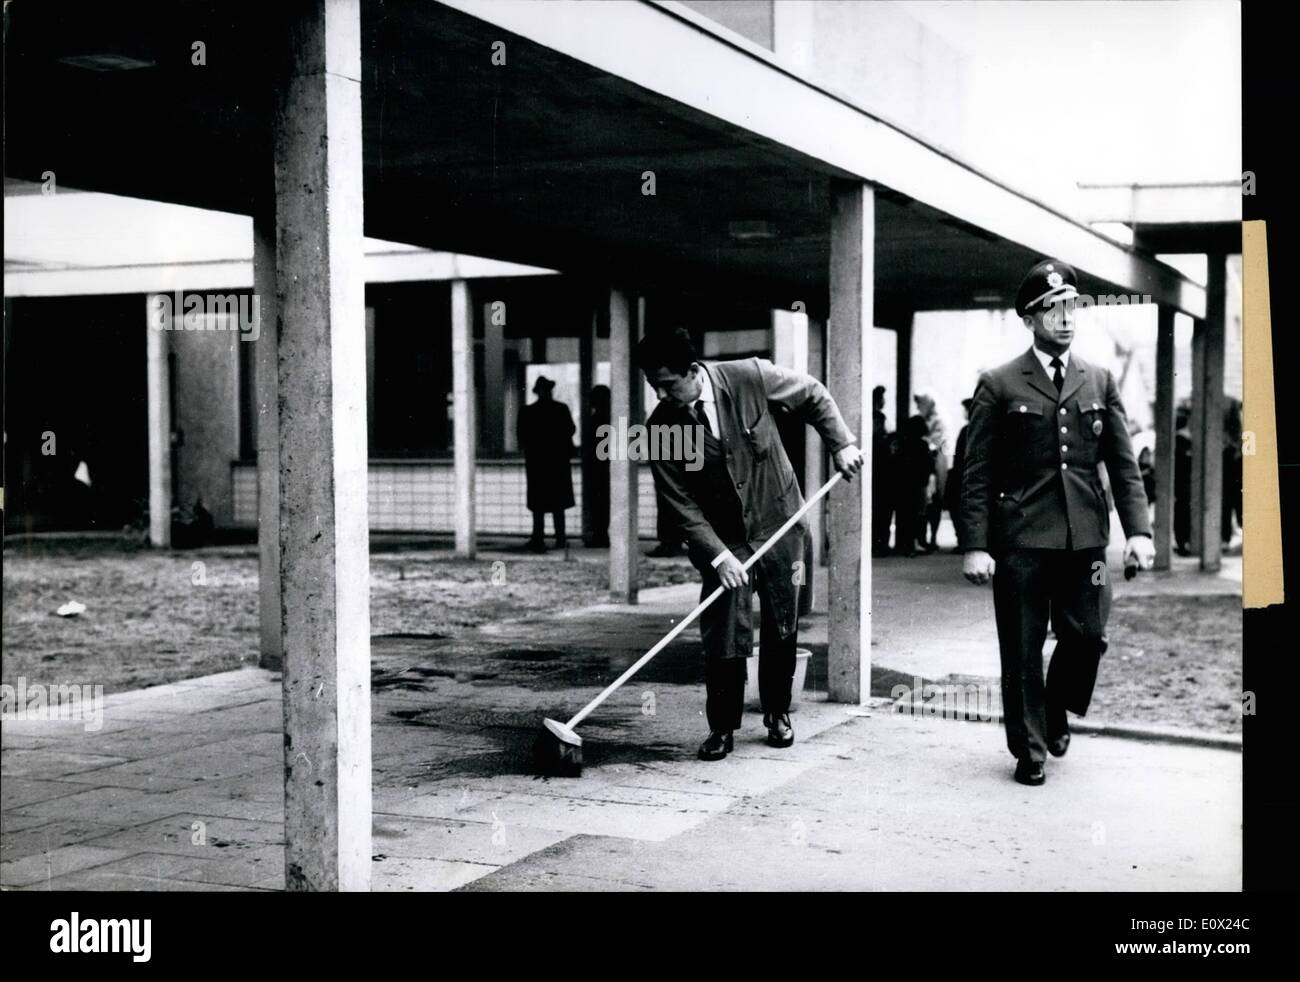 Nov. 11, 1964 - Explosion in school yard, 40 children hurt; 40 school children suffered severe injuries when a blasting slab exploded among the children during a break time. An 11 years old pupil had played with the detonator All children were rushed to hospitals immediately. A police specialist searches for rests of the blast. Stock Photo